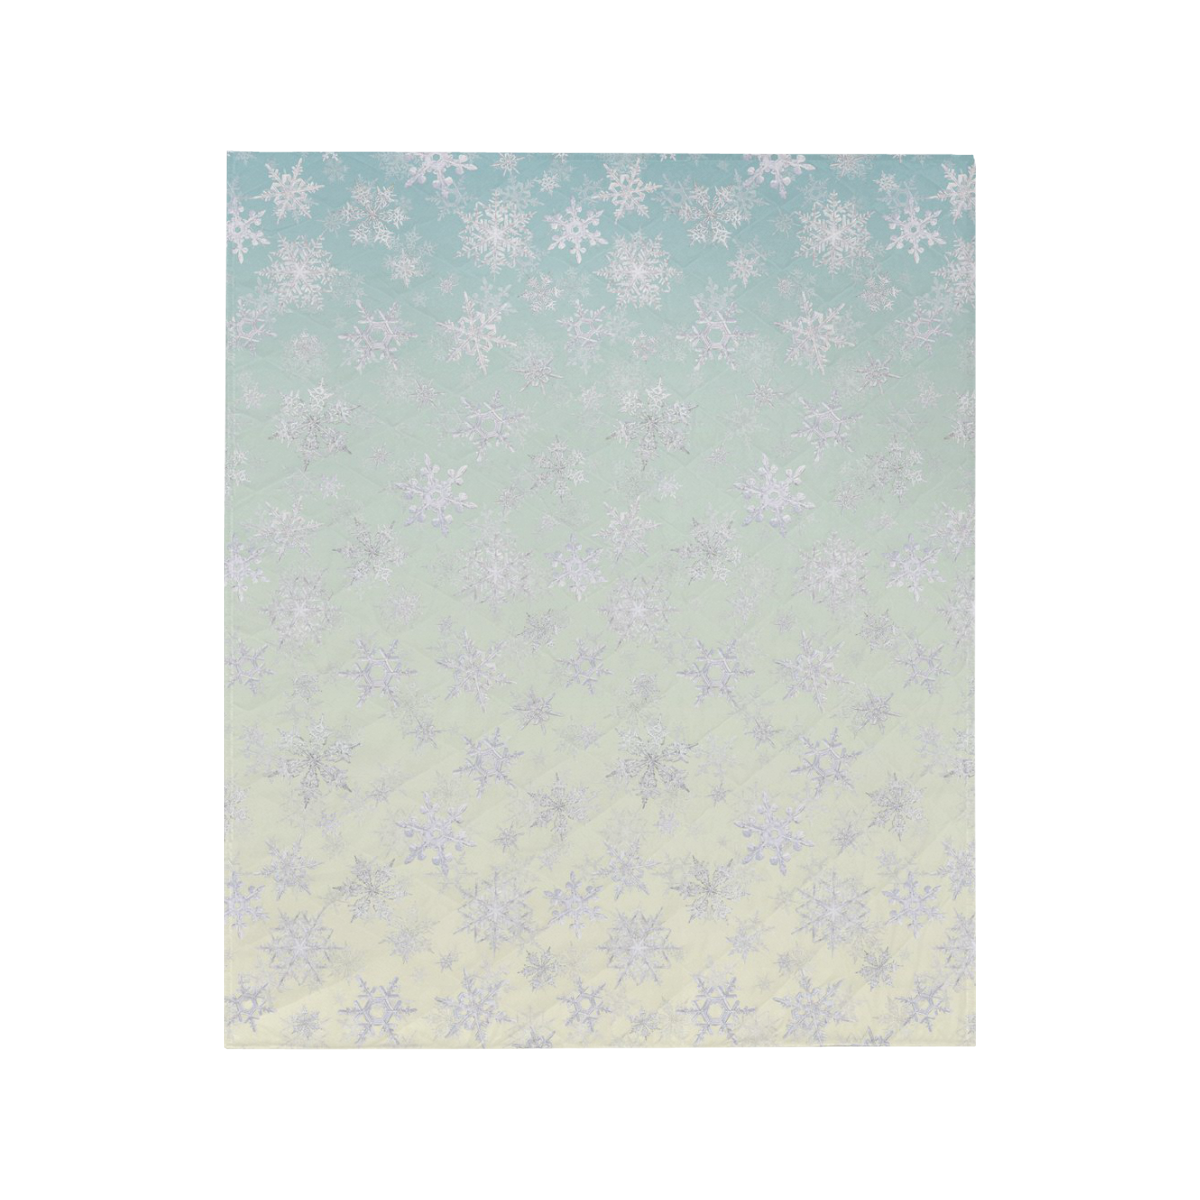 Frosty Day Snowflakes on Misty Sky Quilt 50"x60"